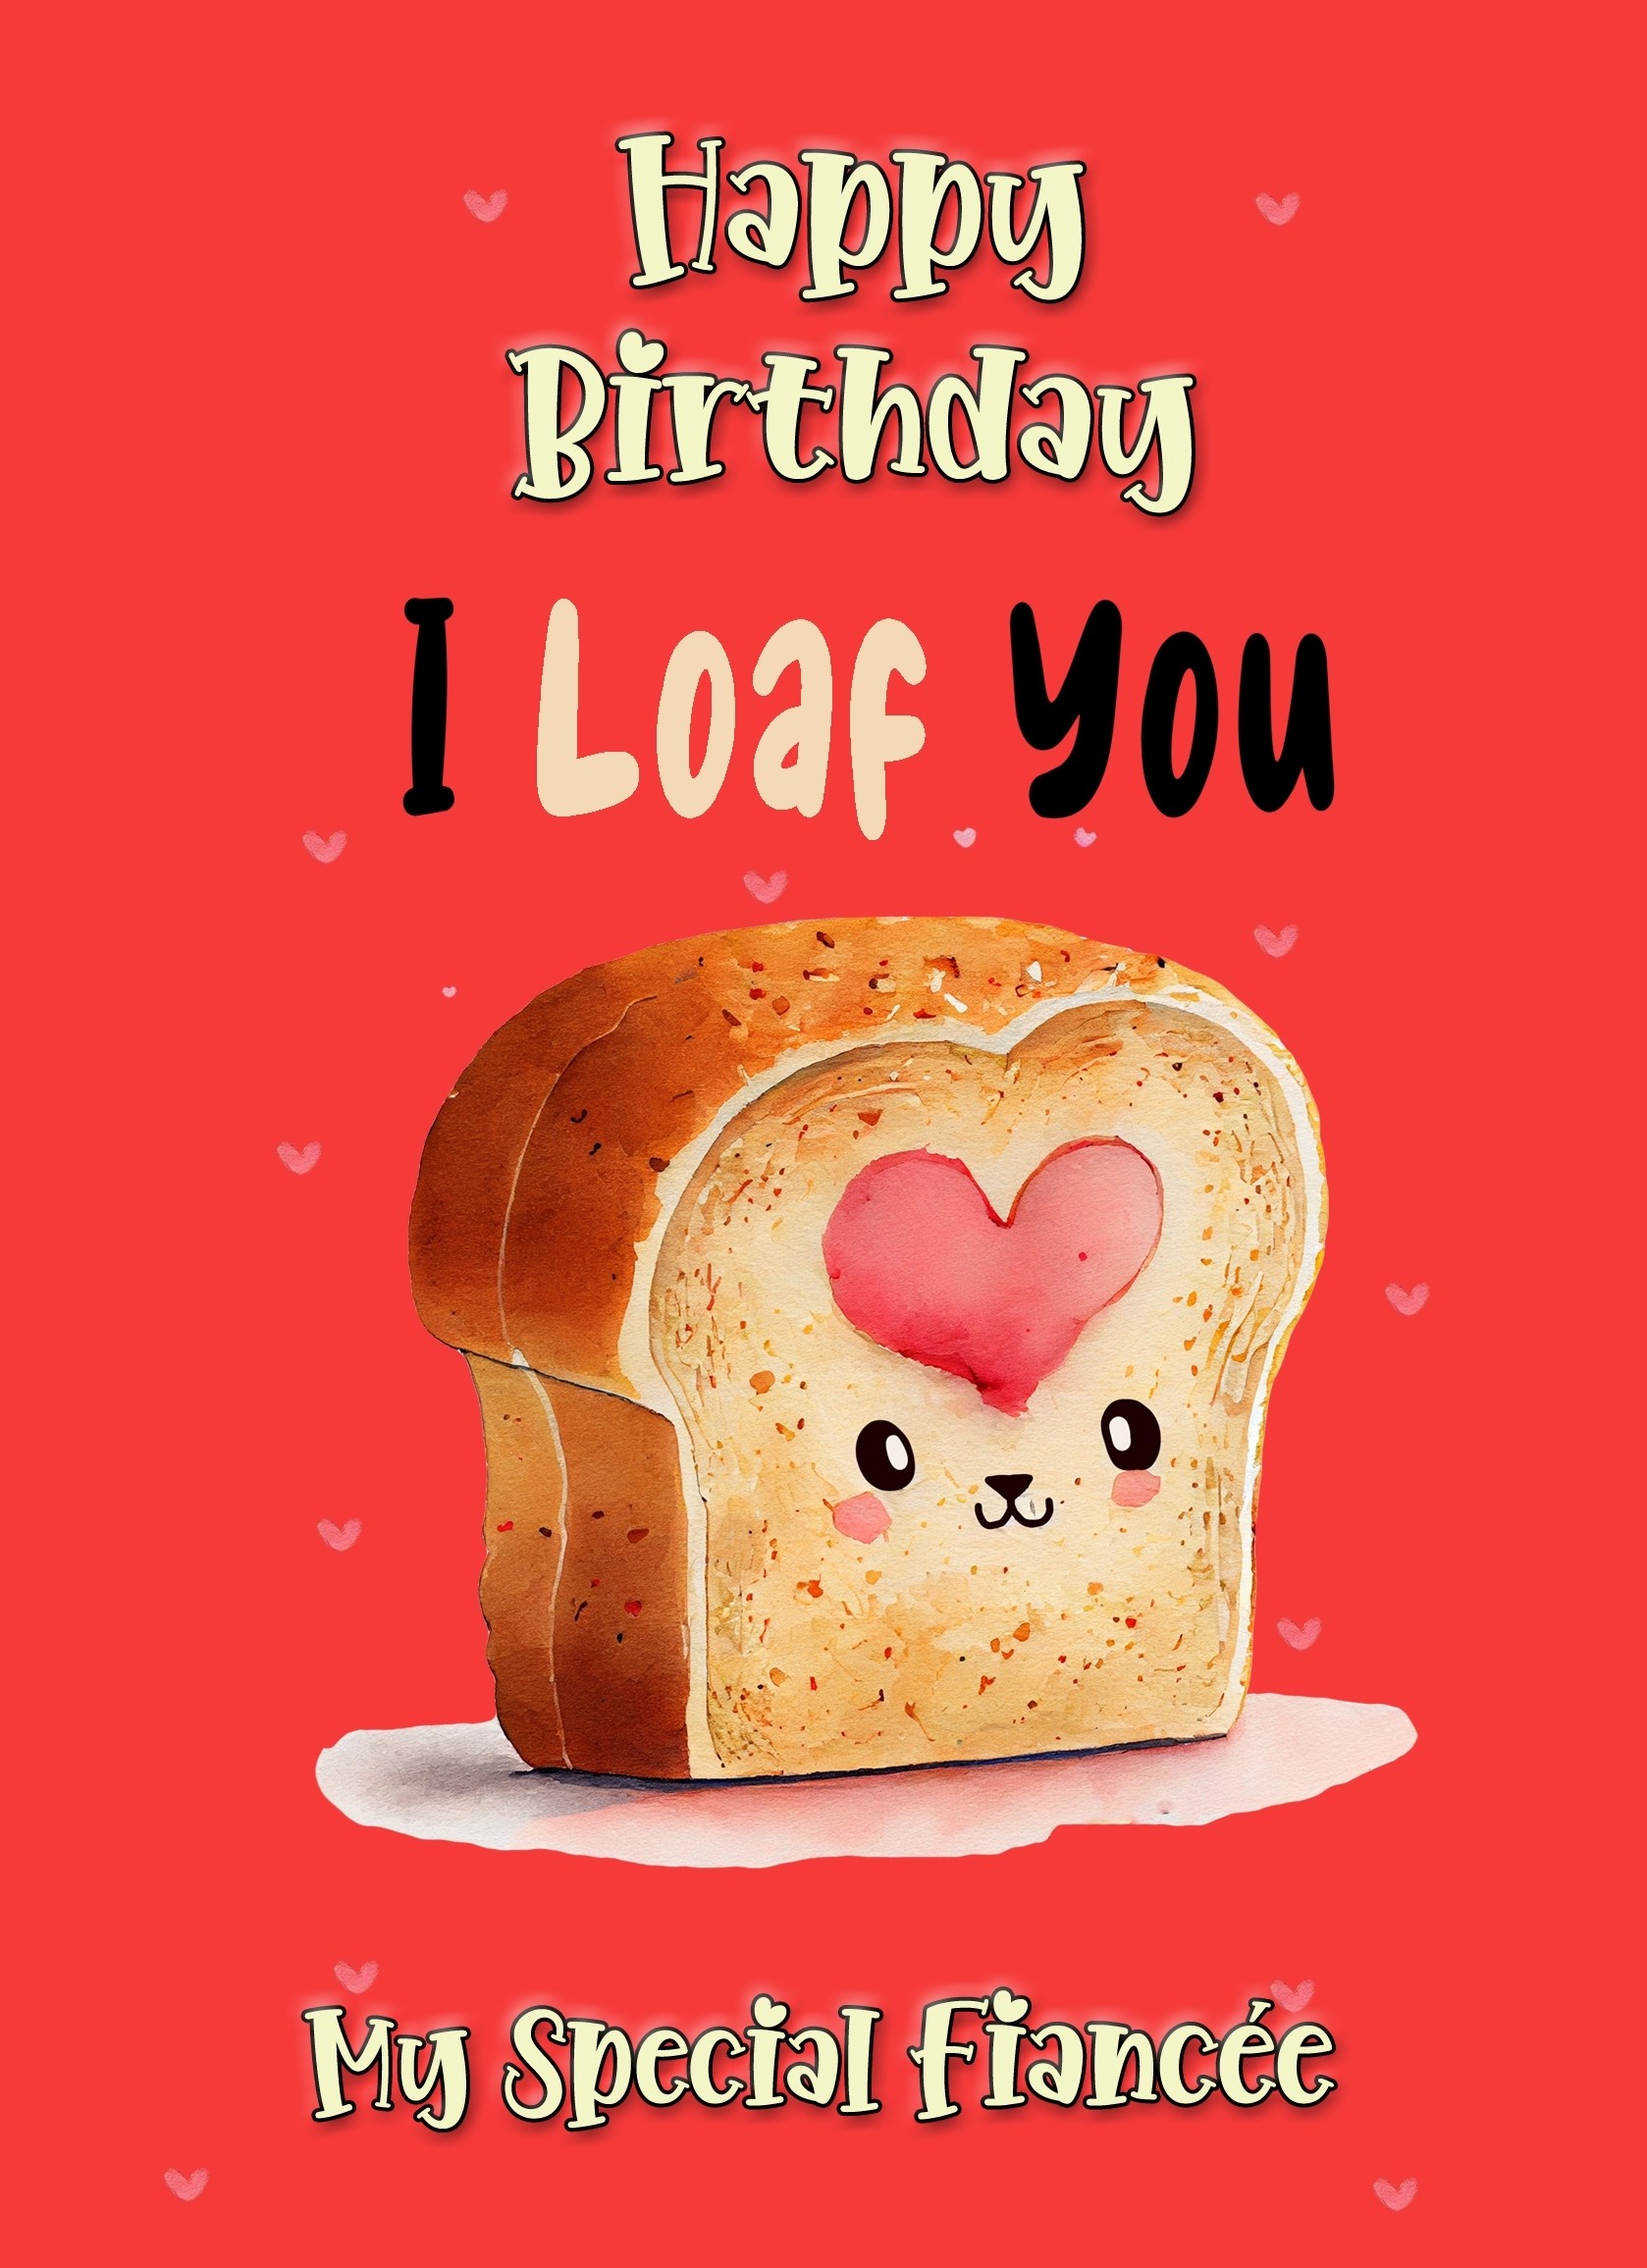 Funny Pun Romantic Birthday Card for Fiancee (Loaf You)